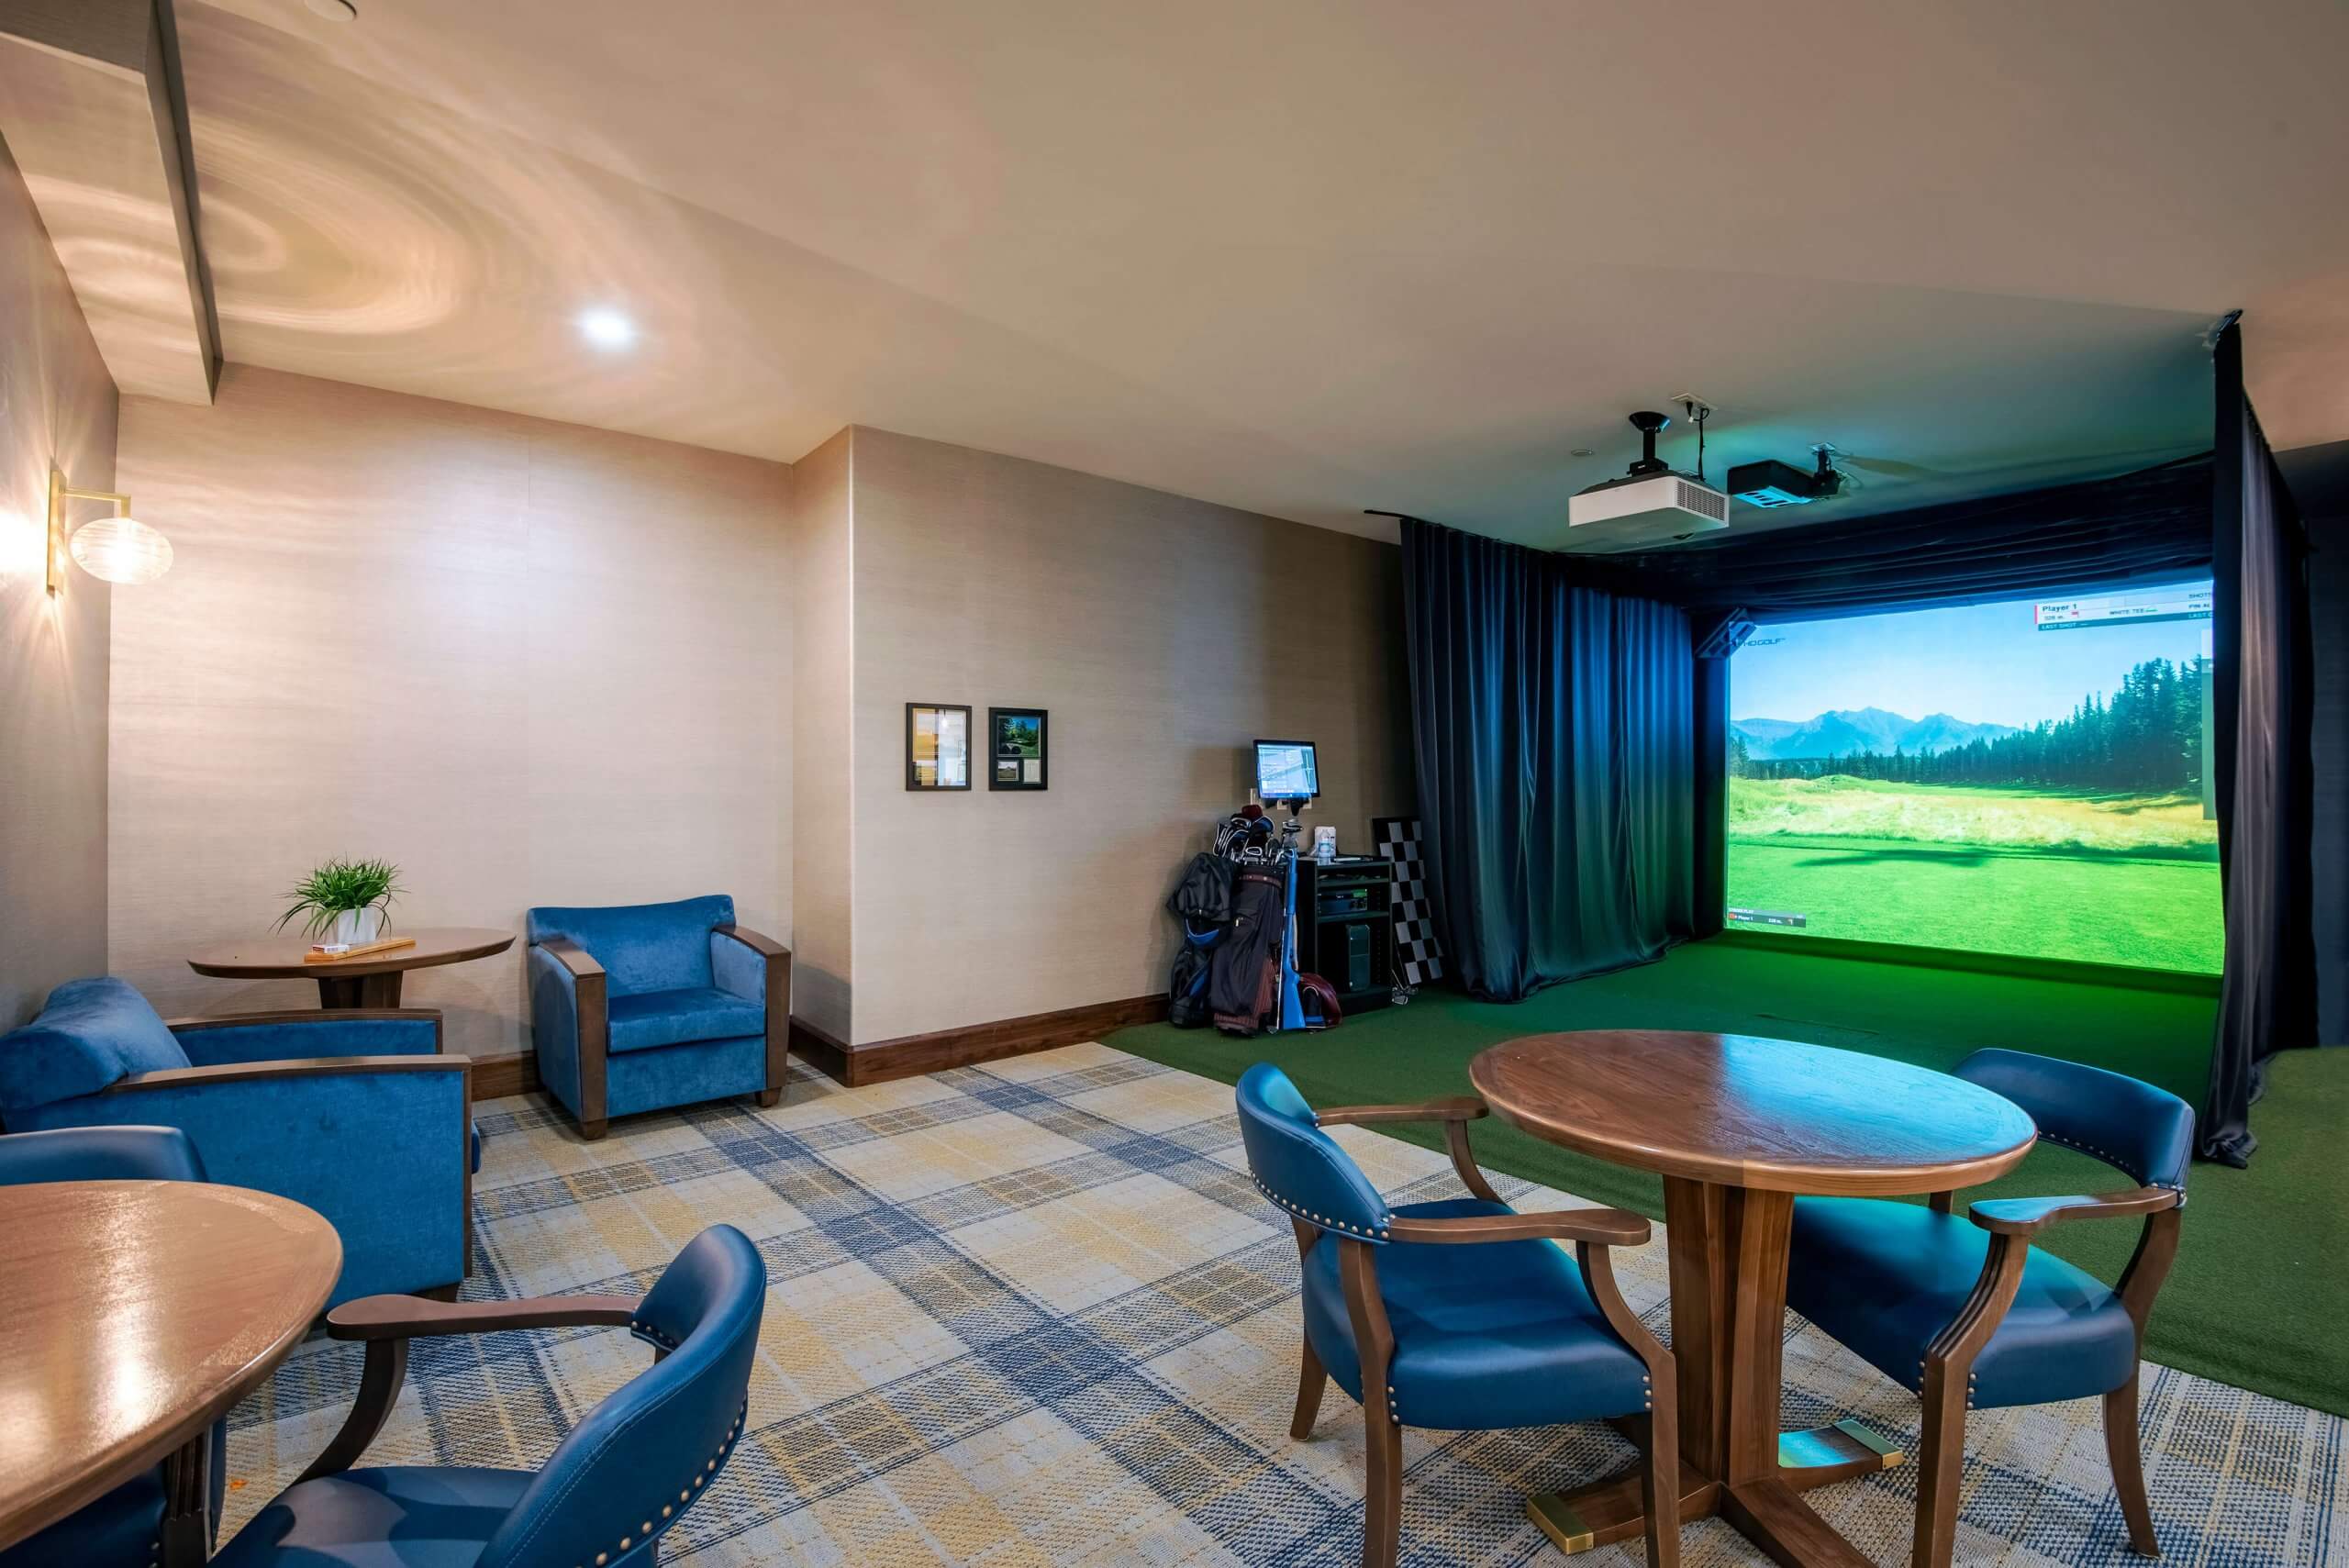 Activity room in retirement home with virtual reality golf displayed on large screen next to equipment, and three tables with chairs